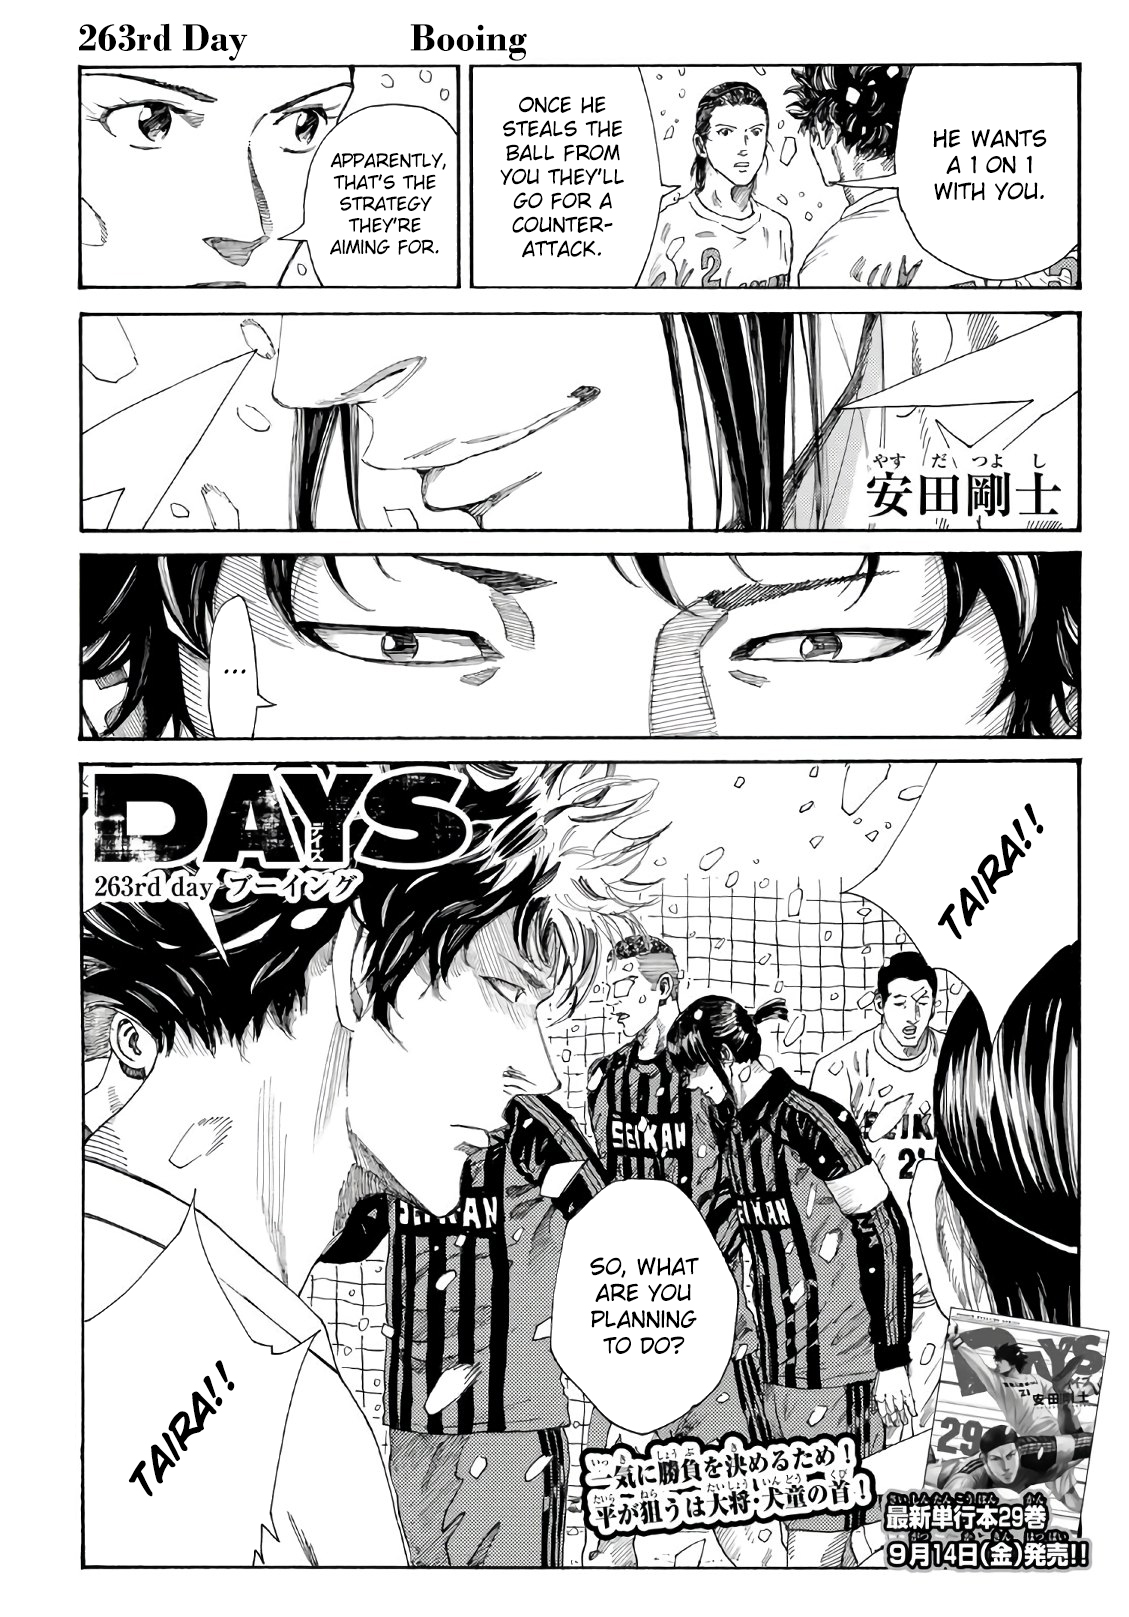 Days - Page 2